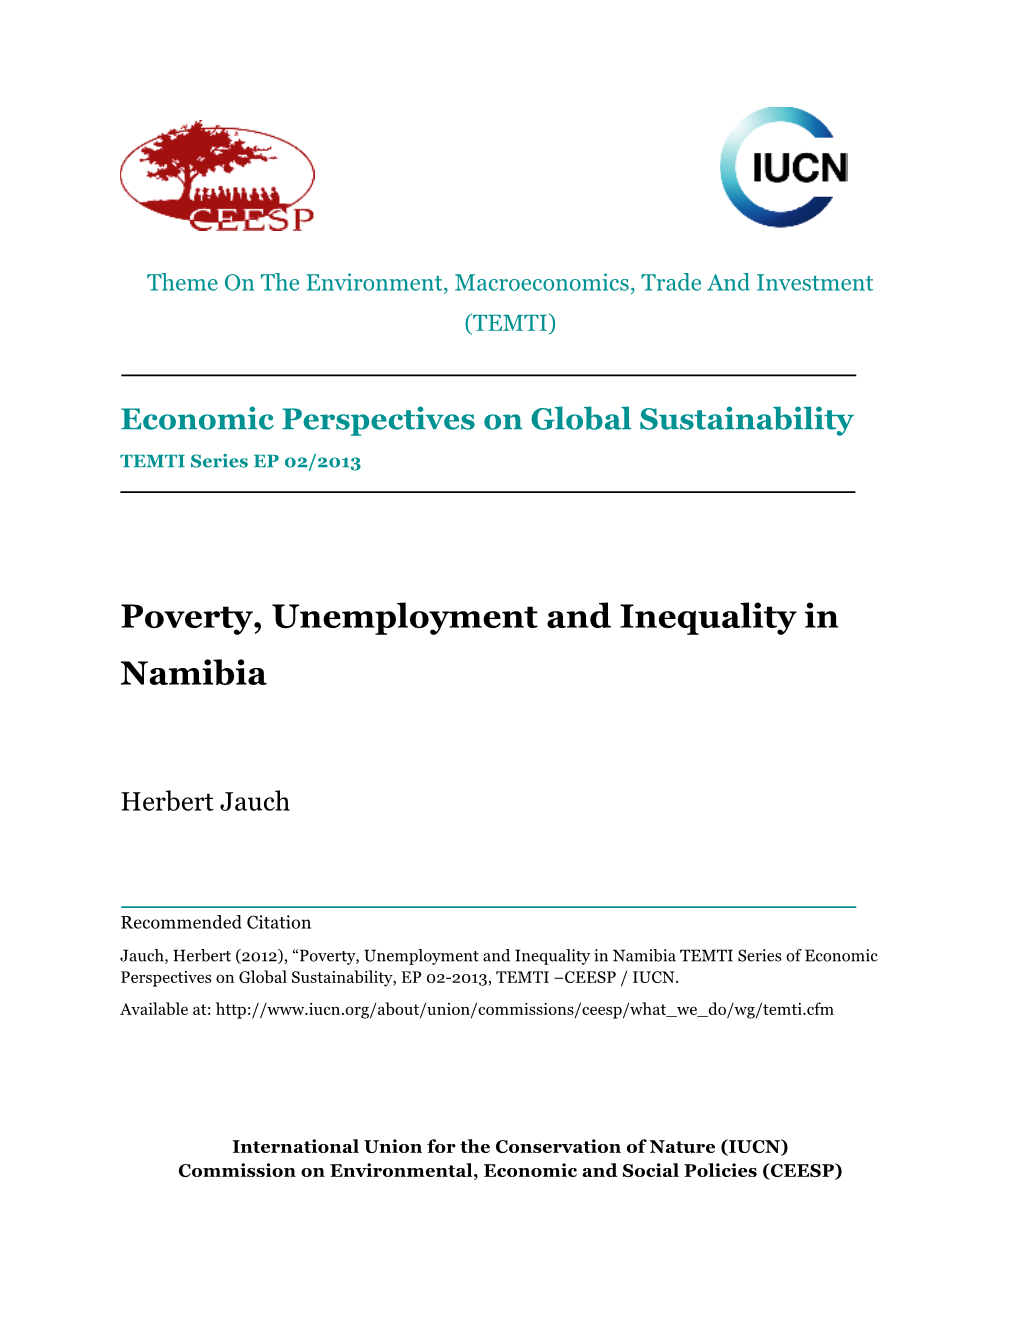 Poverty, Unemployment and Inequality in Namibia